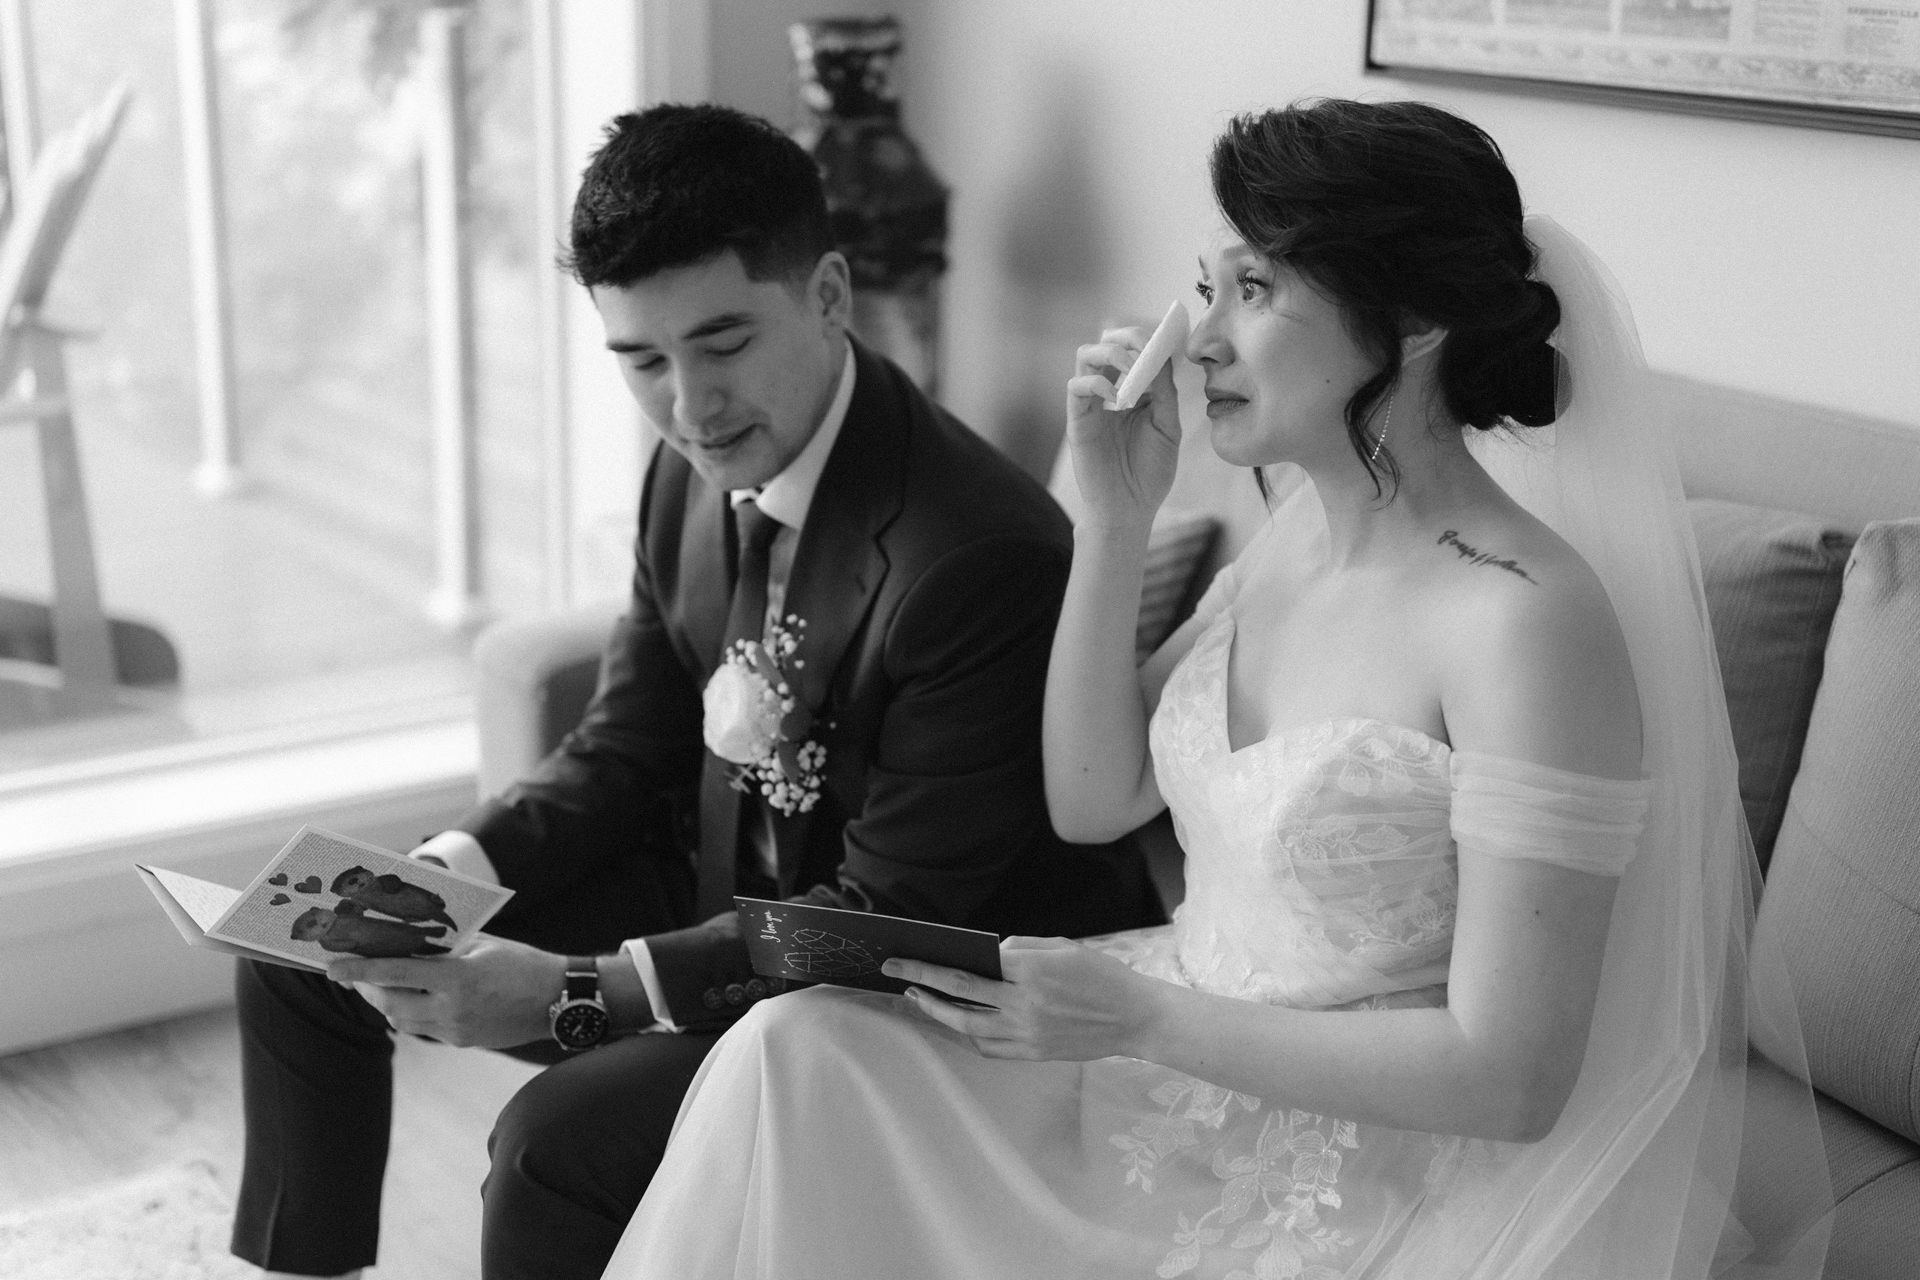 A bride and groom sitting on a sofa, reading heartfelt notes, with the groom appearing to wipe a tear and the bride smiling